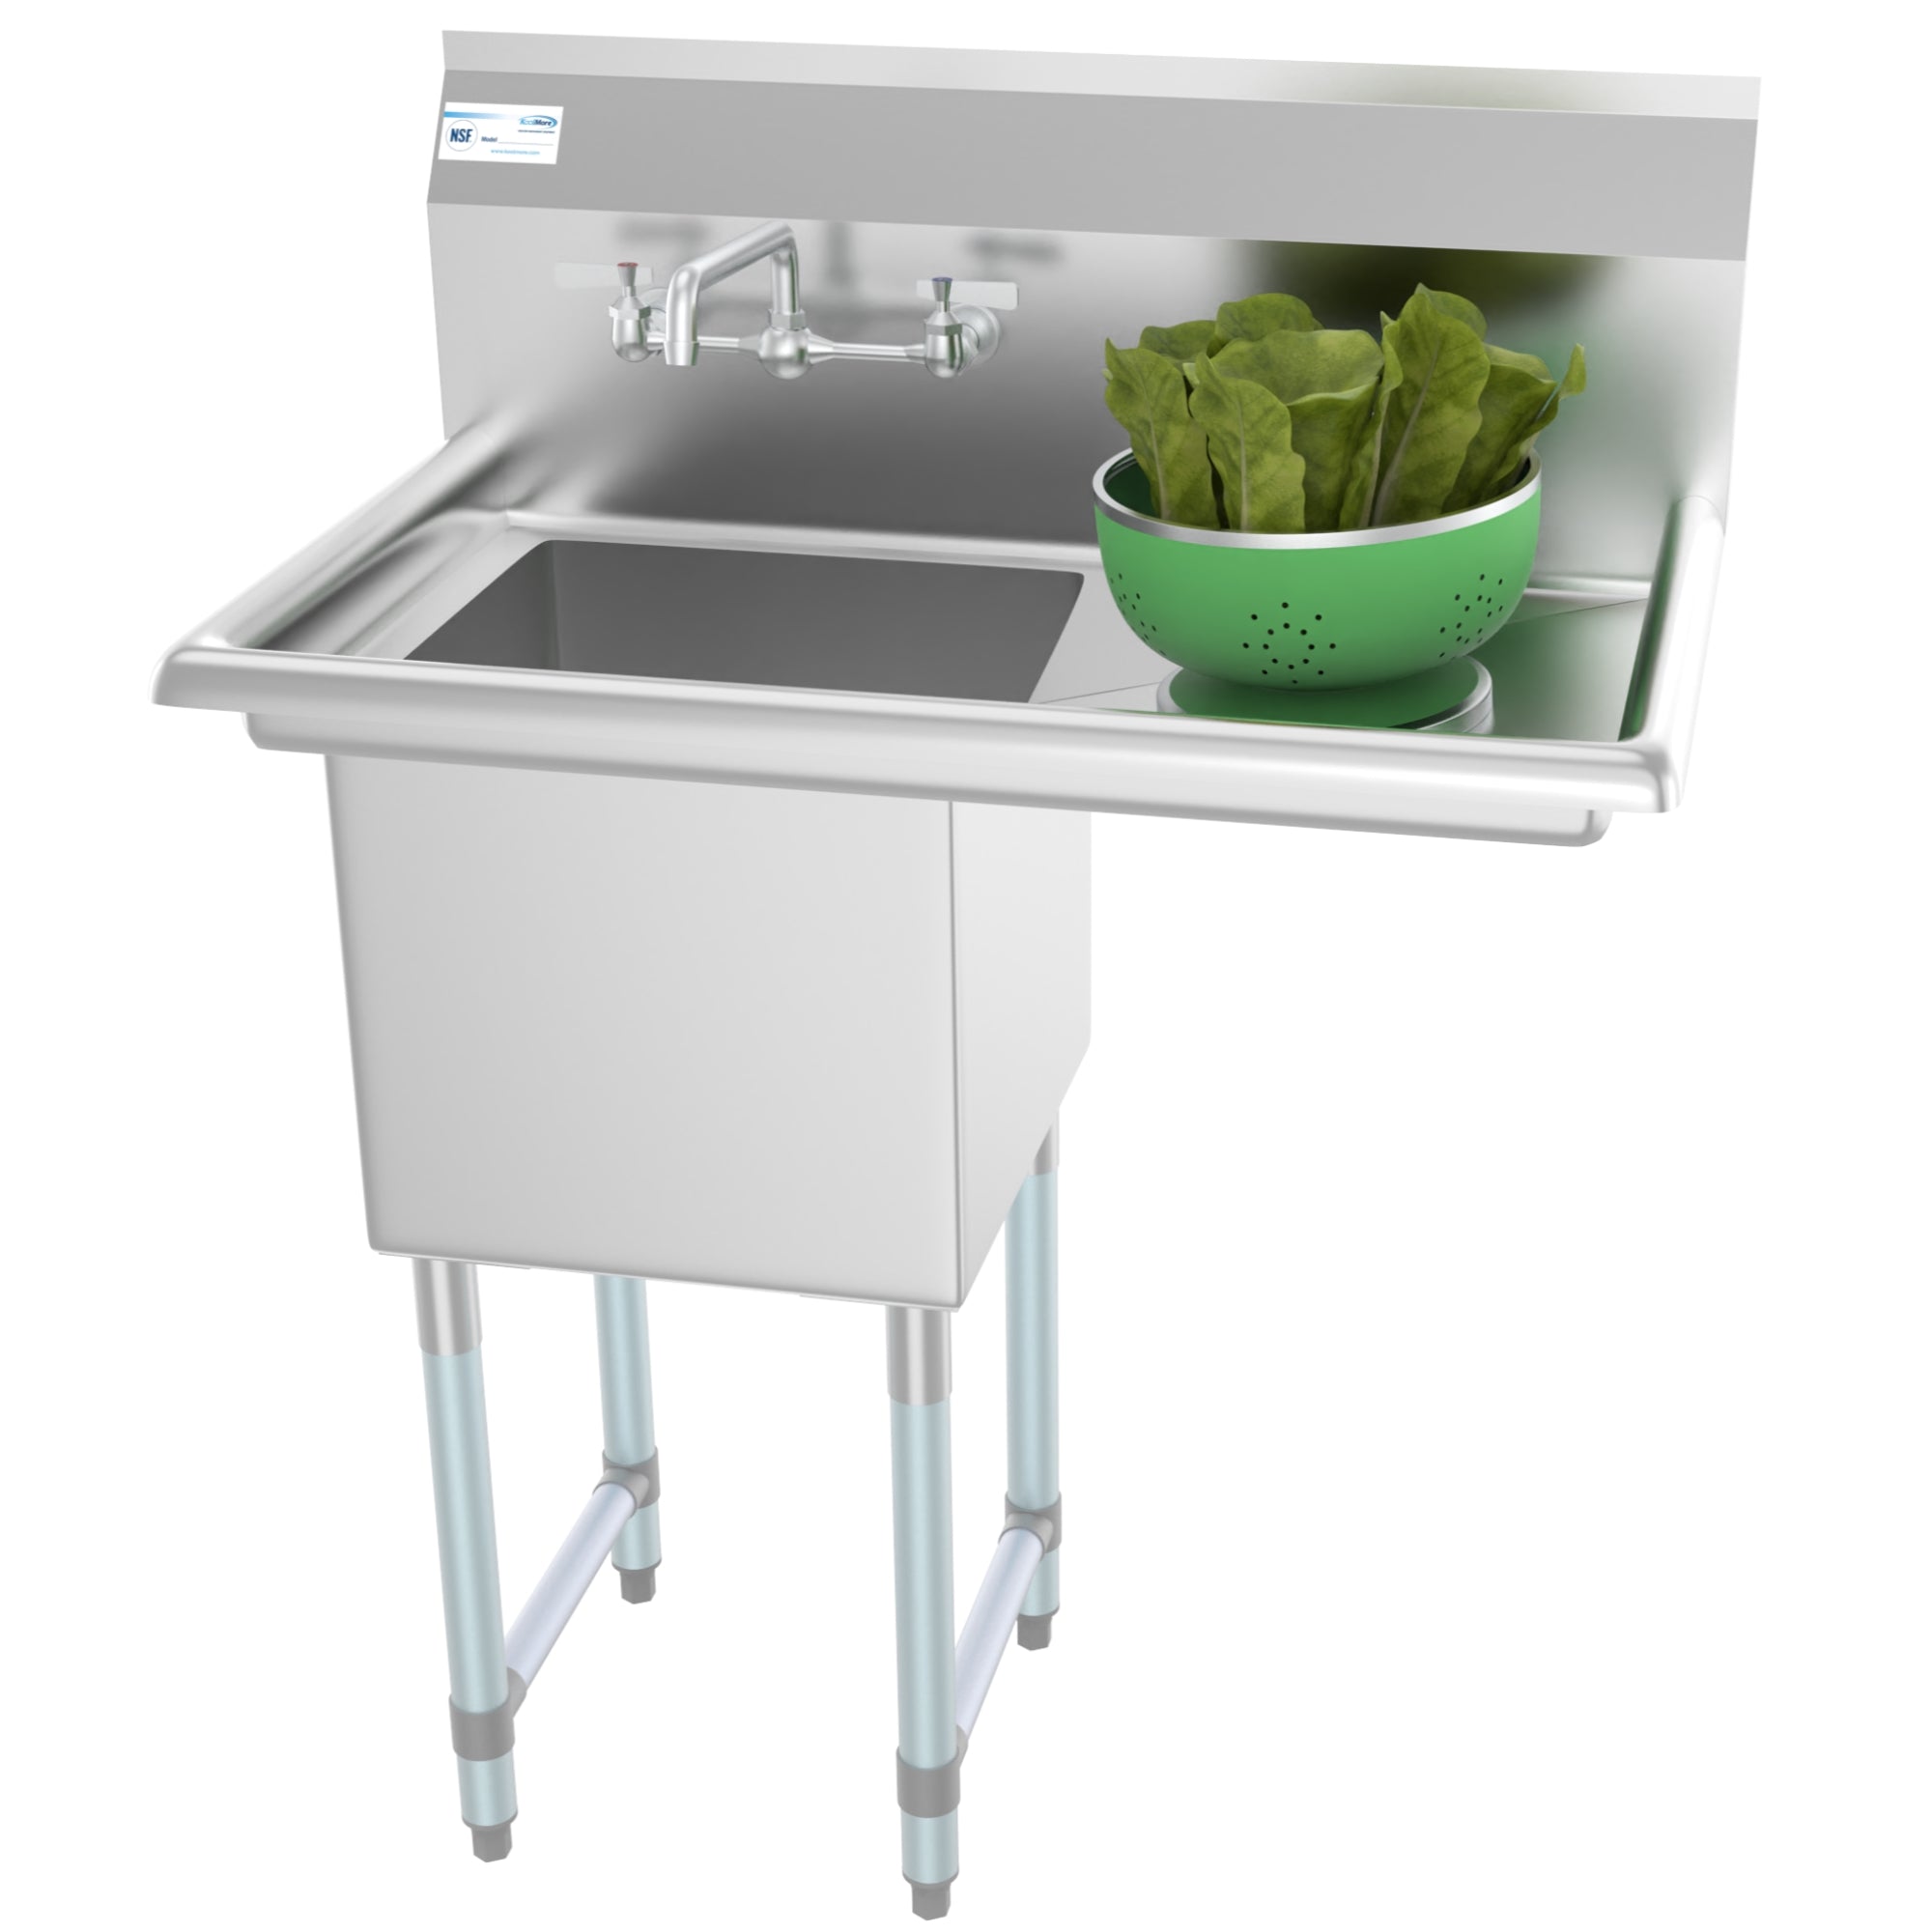 Drainboard Kitchen Sink: Is One Right for You?